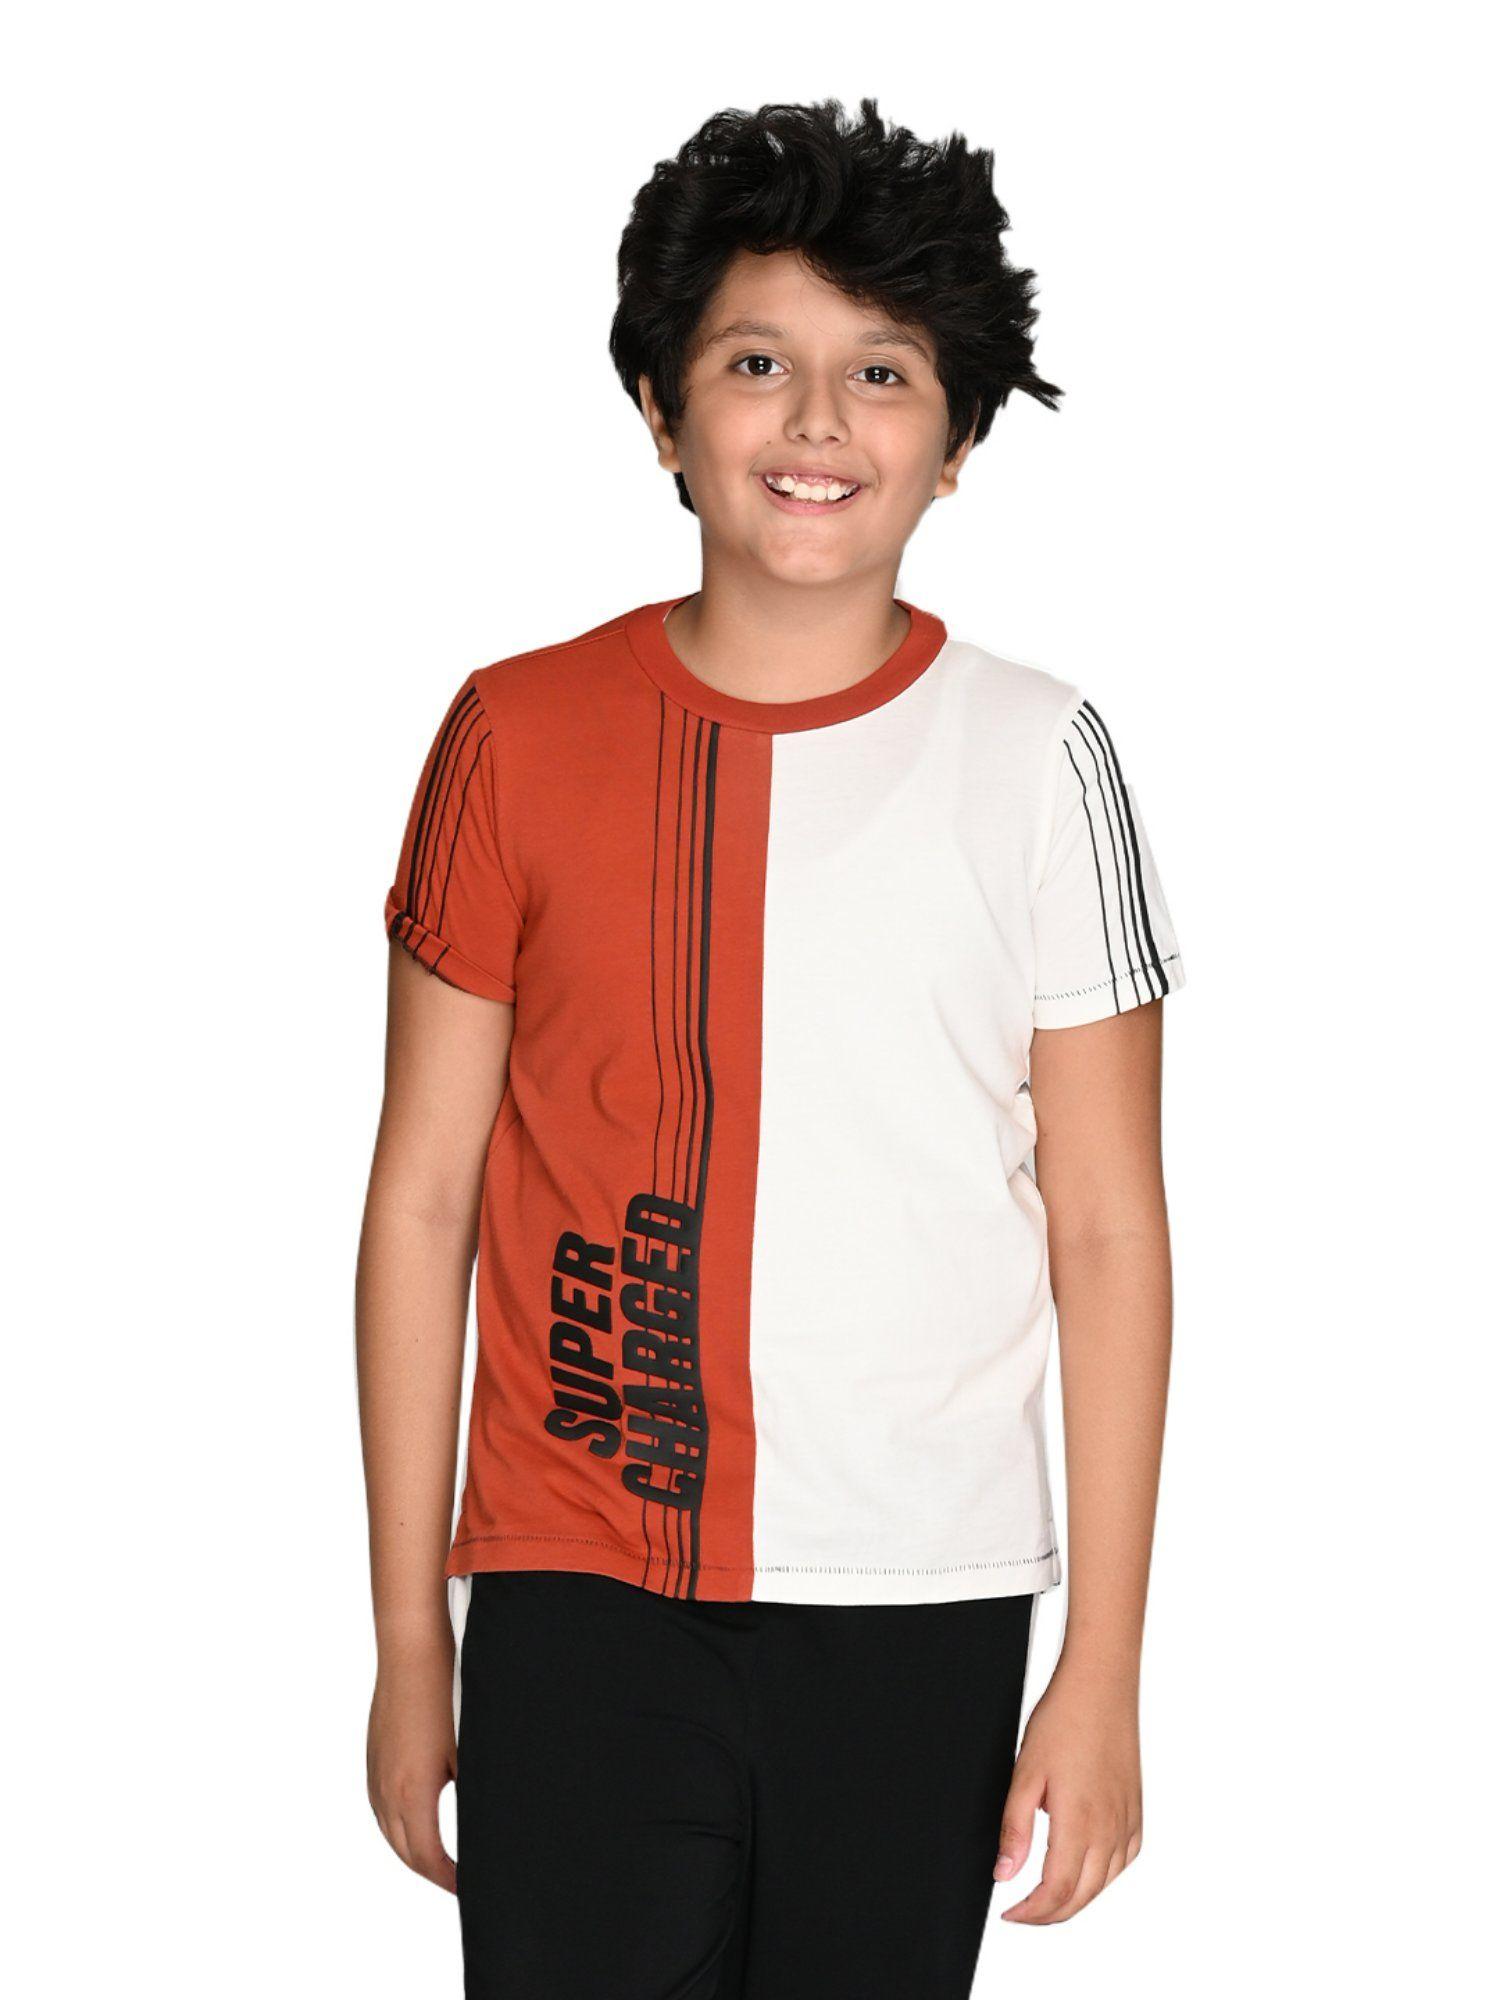 Esy Tee New Print Brown and White